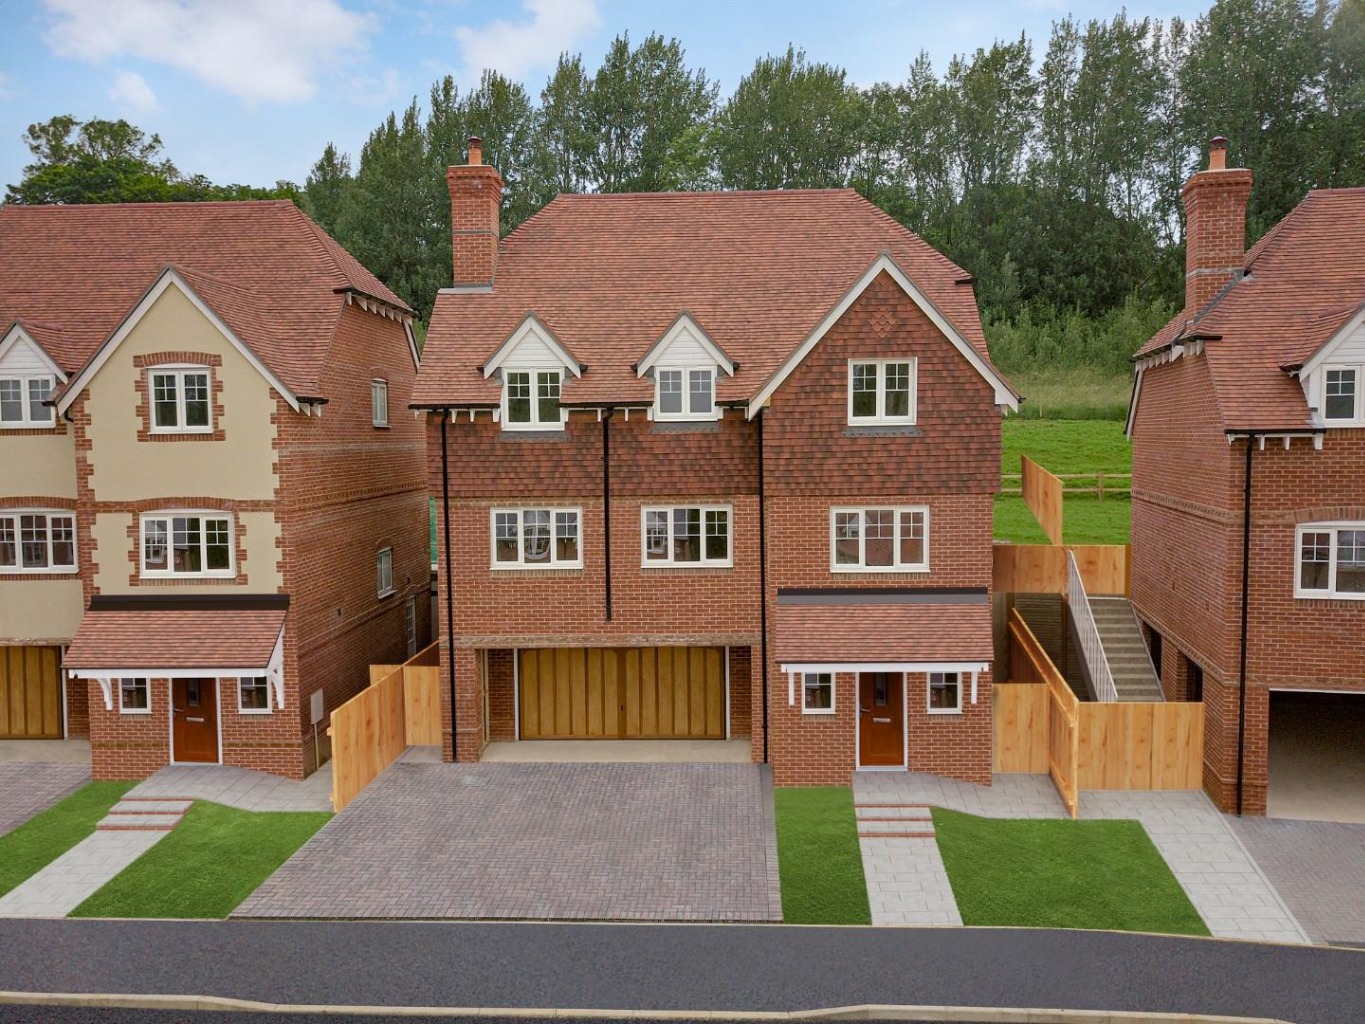 *Marketed by Andy Meade* A stunning 4 bedroom detached house built to Westbuild Homes Sussex Design on the delightful Reed Gardens Development situated in the West Berkshire countryside village of Woolhampton. Contact Andy For a viewing .